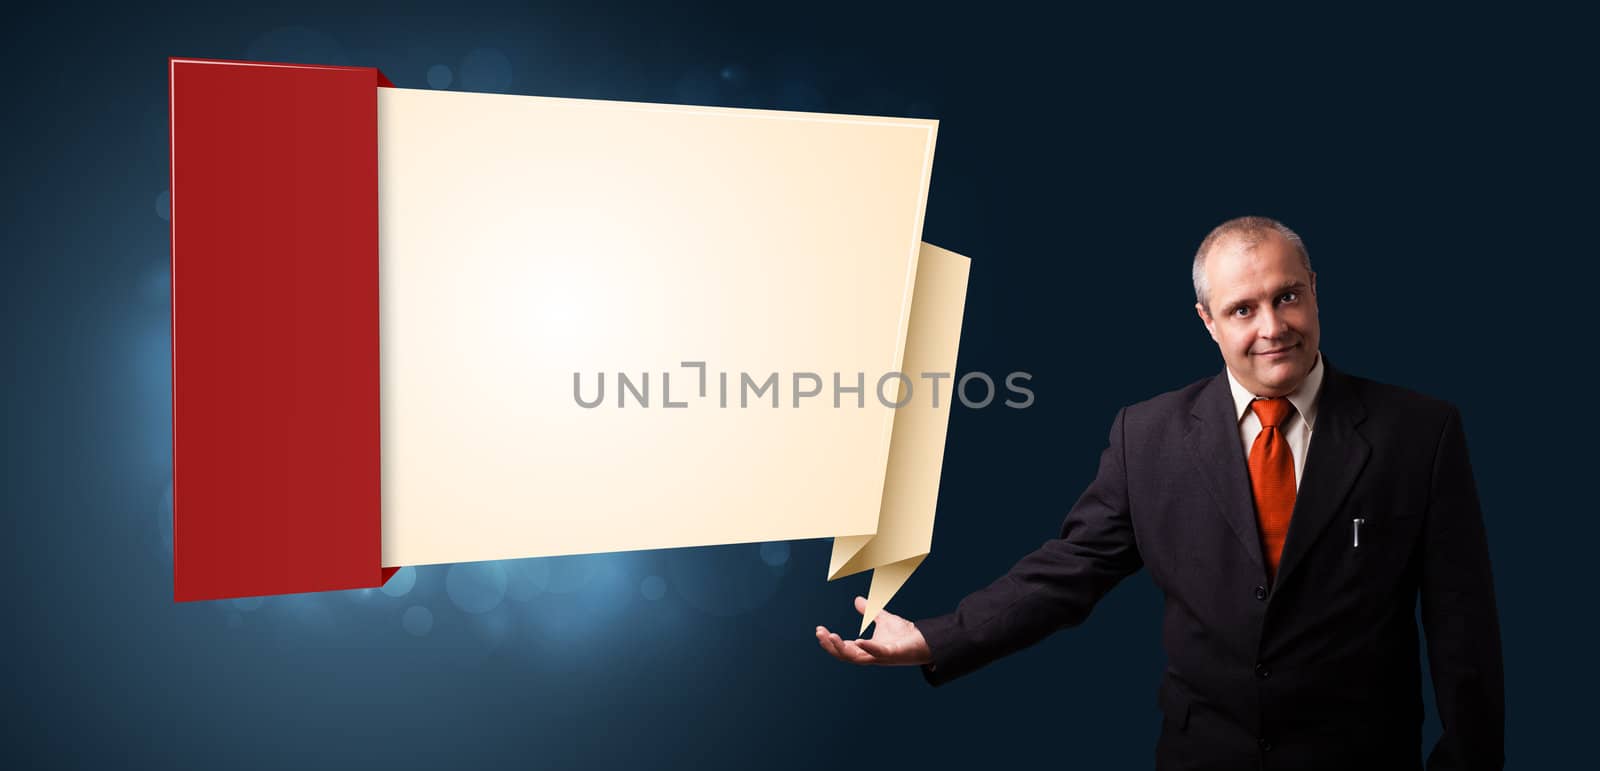 businessman in suit presenting modern origami copy space